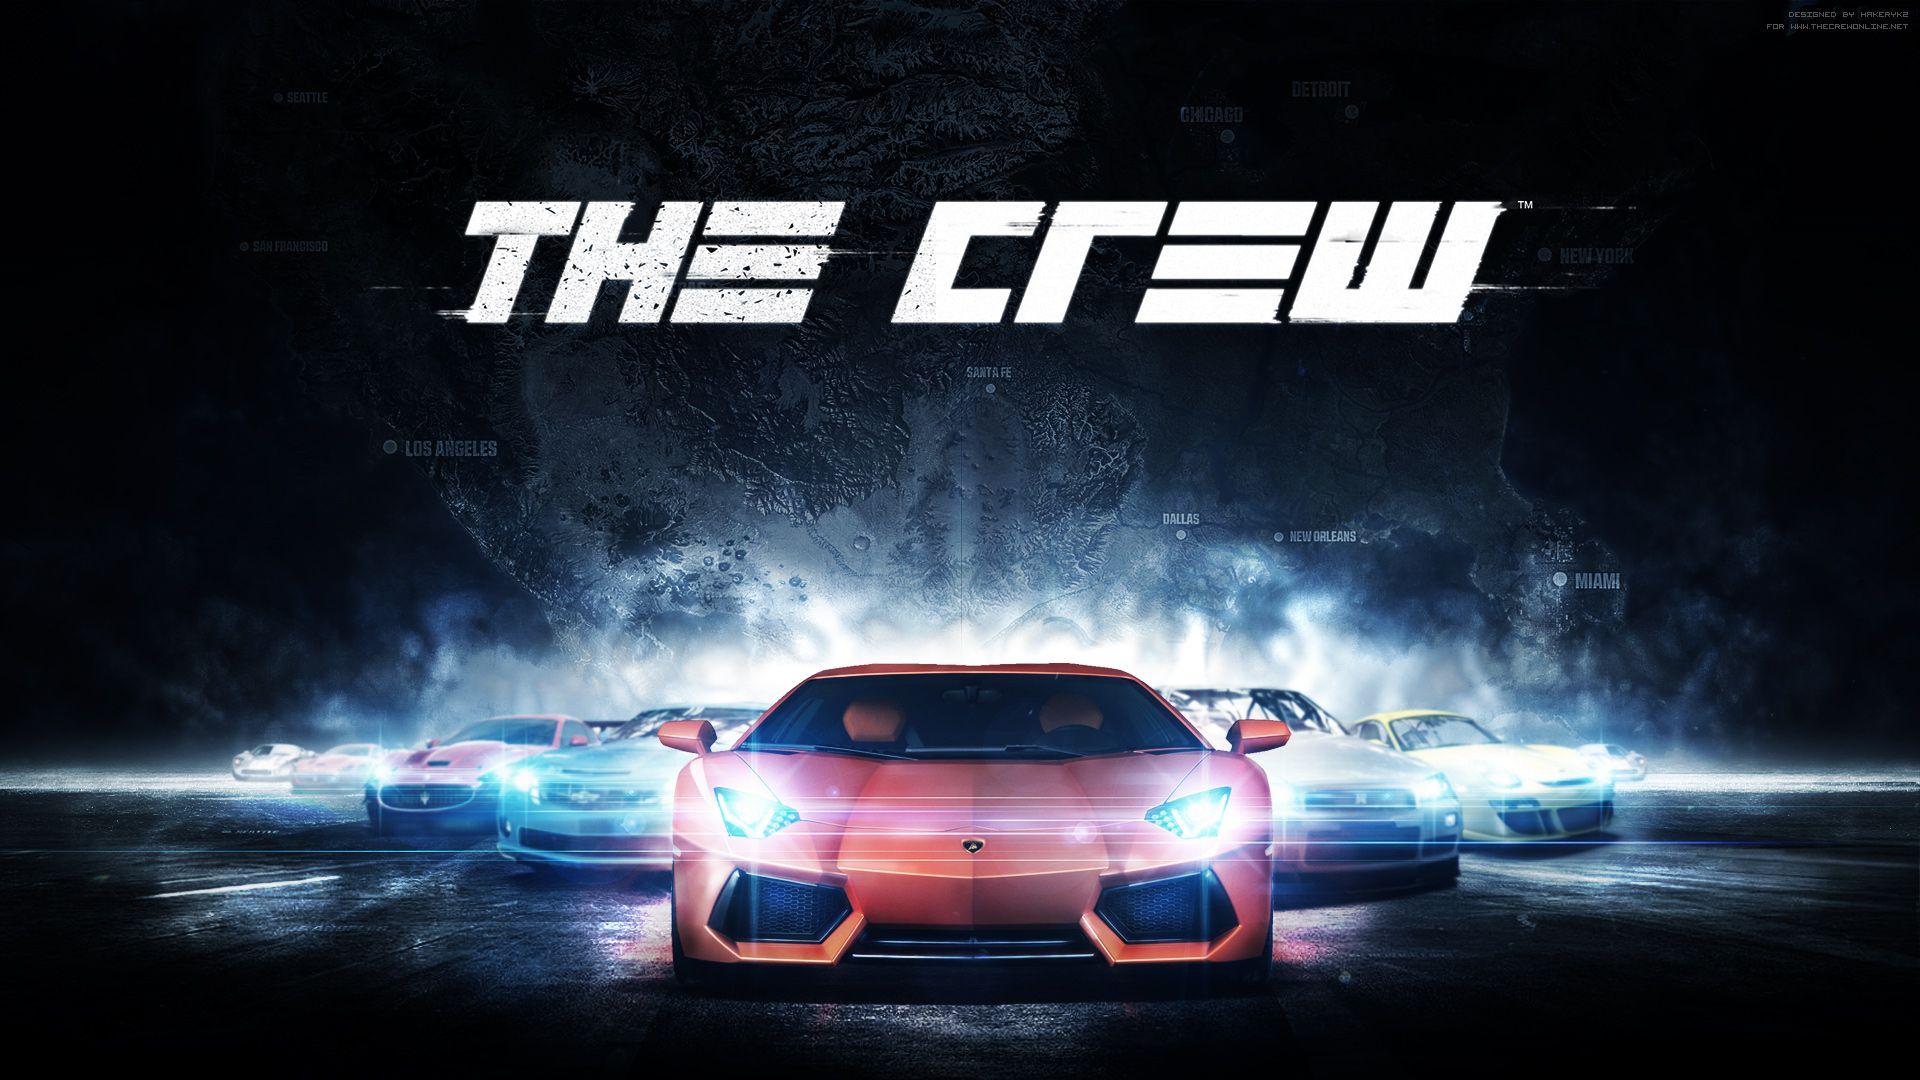 Wallpaper game, Ubisoft, The Crew 2 for mobile and desktop, section игры,  resolution 1920x1080 - download